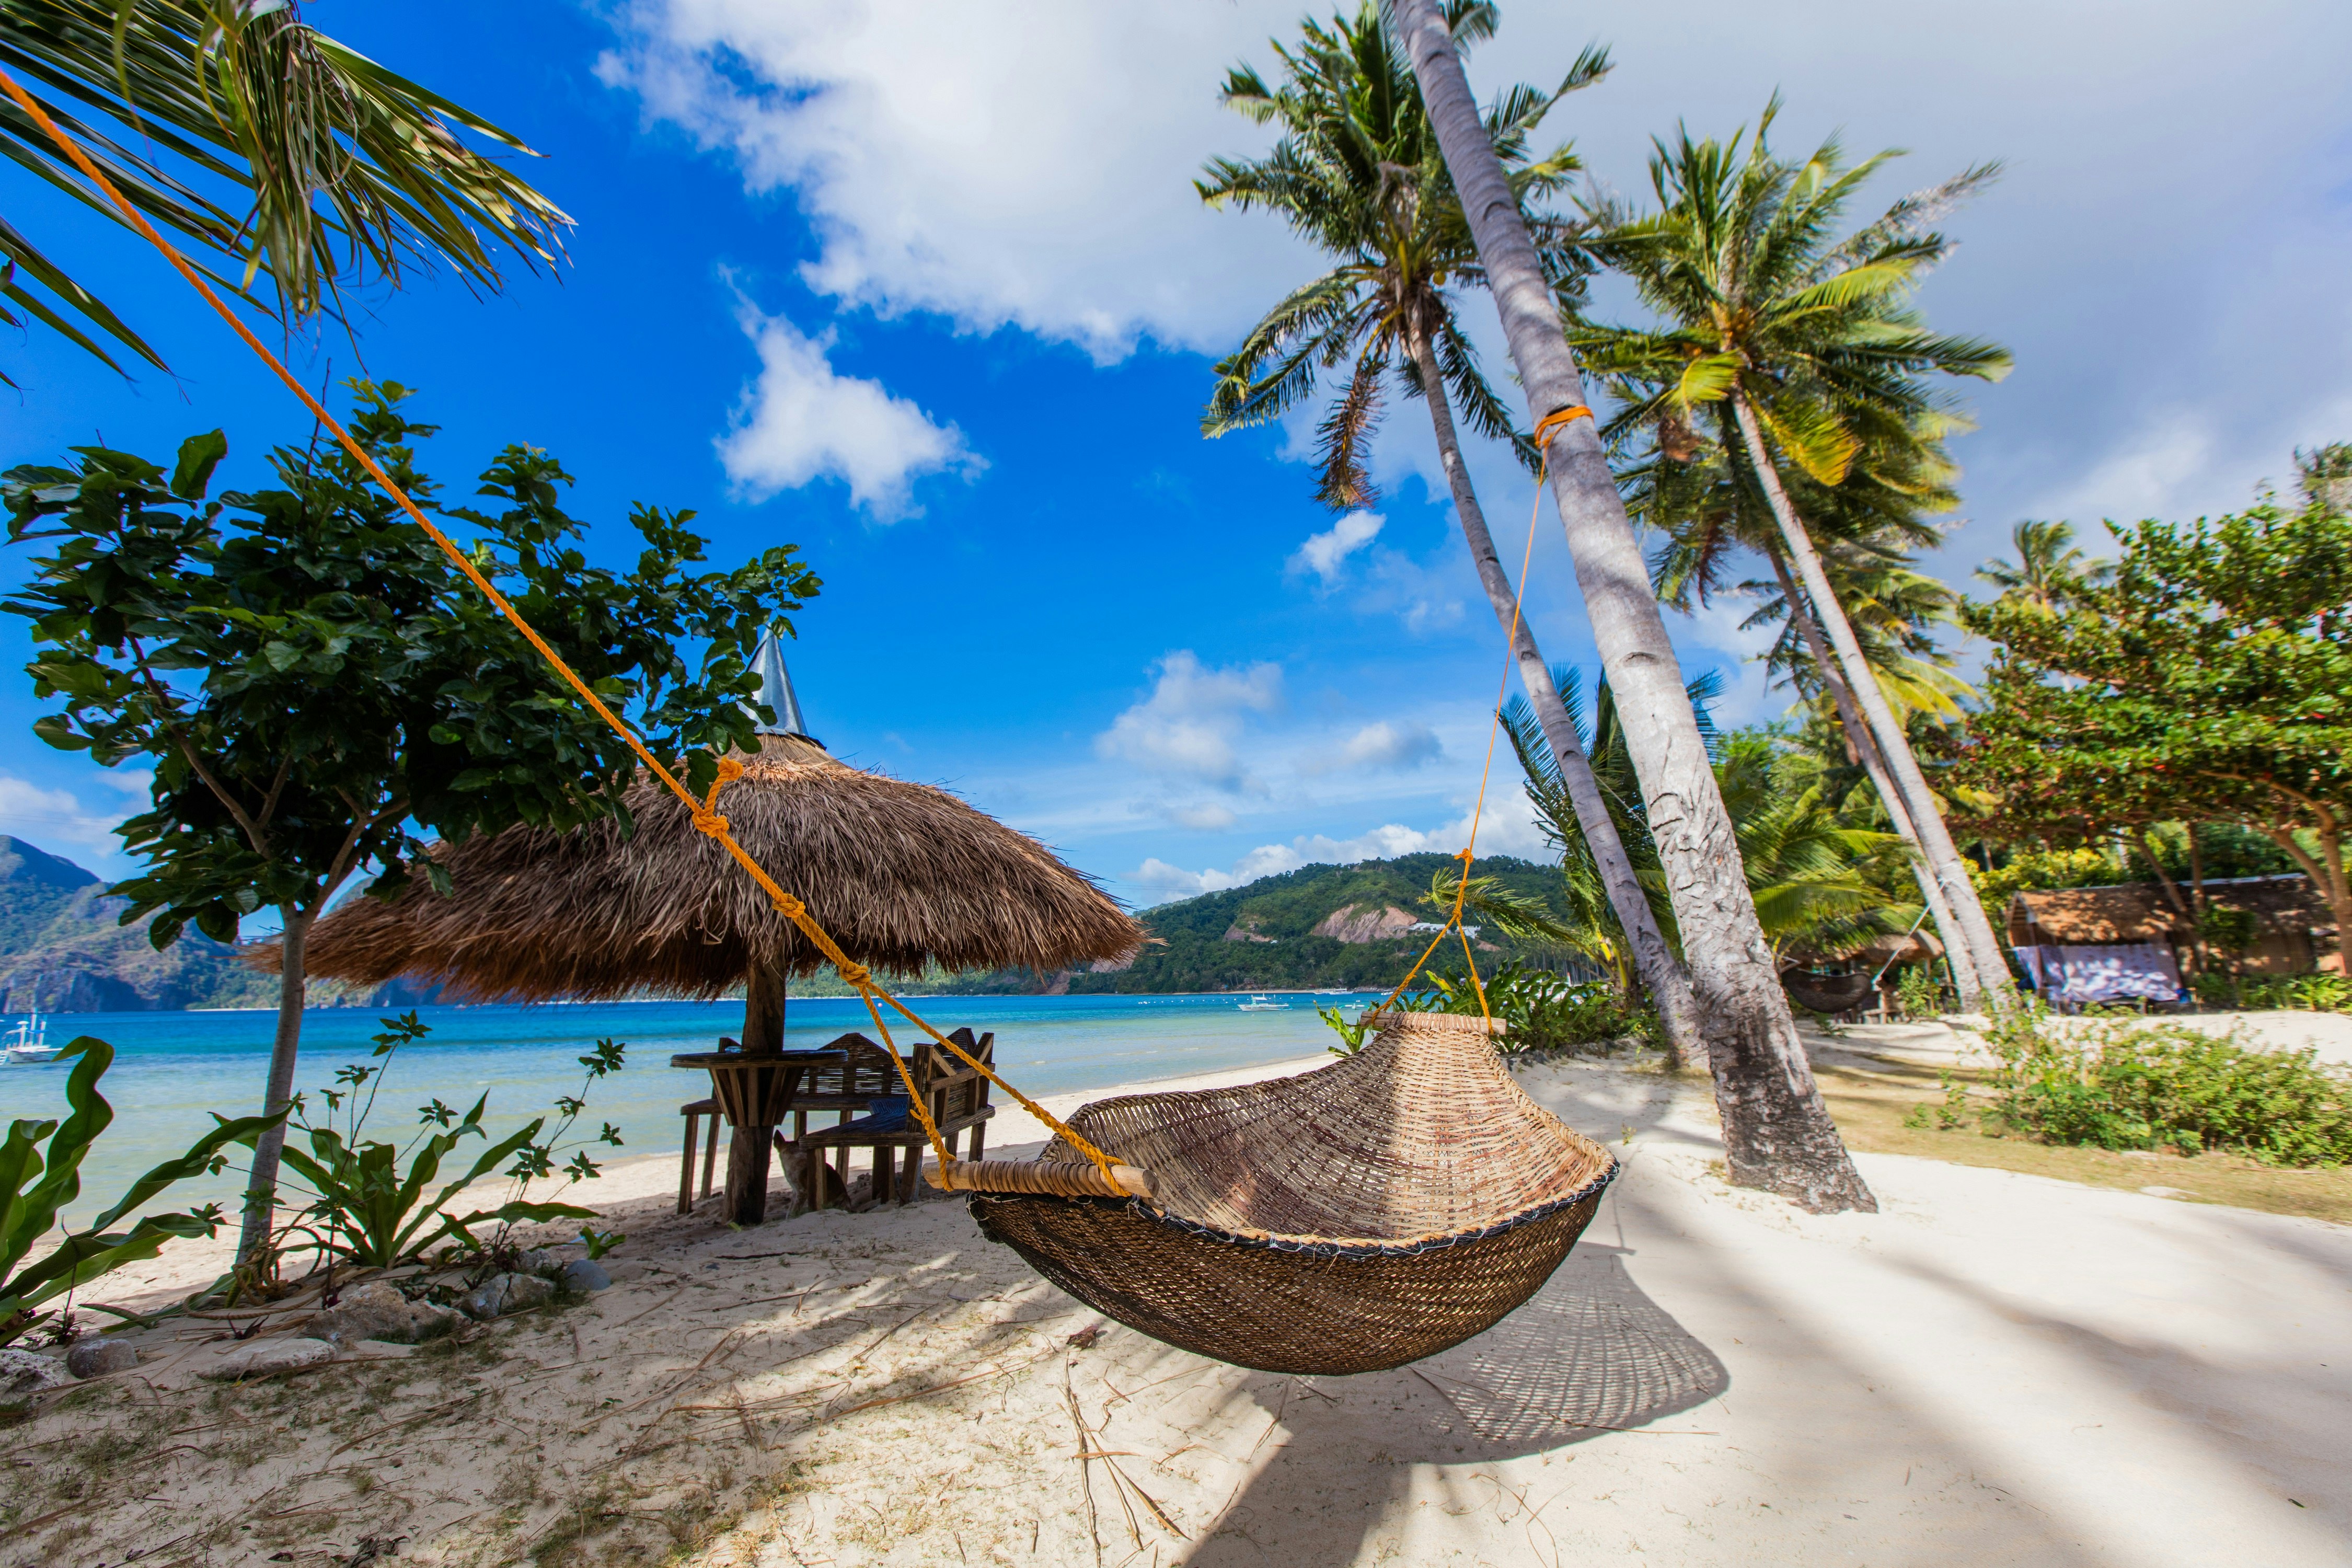 A hammock strung between two palm trees next to a beach on Cadlao Island, Palawan, in the Philippines. Behind the hammock a strip of white sand is visible and beyond that a beautiful blue ocean.